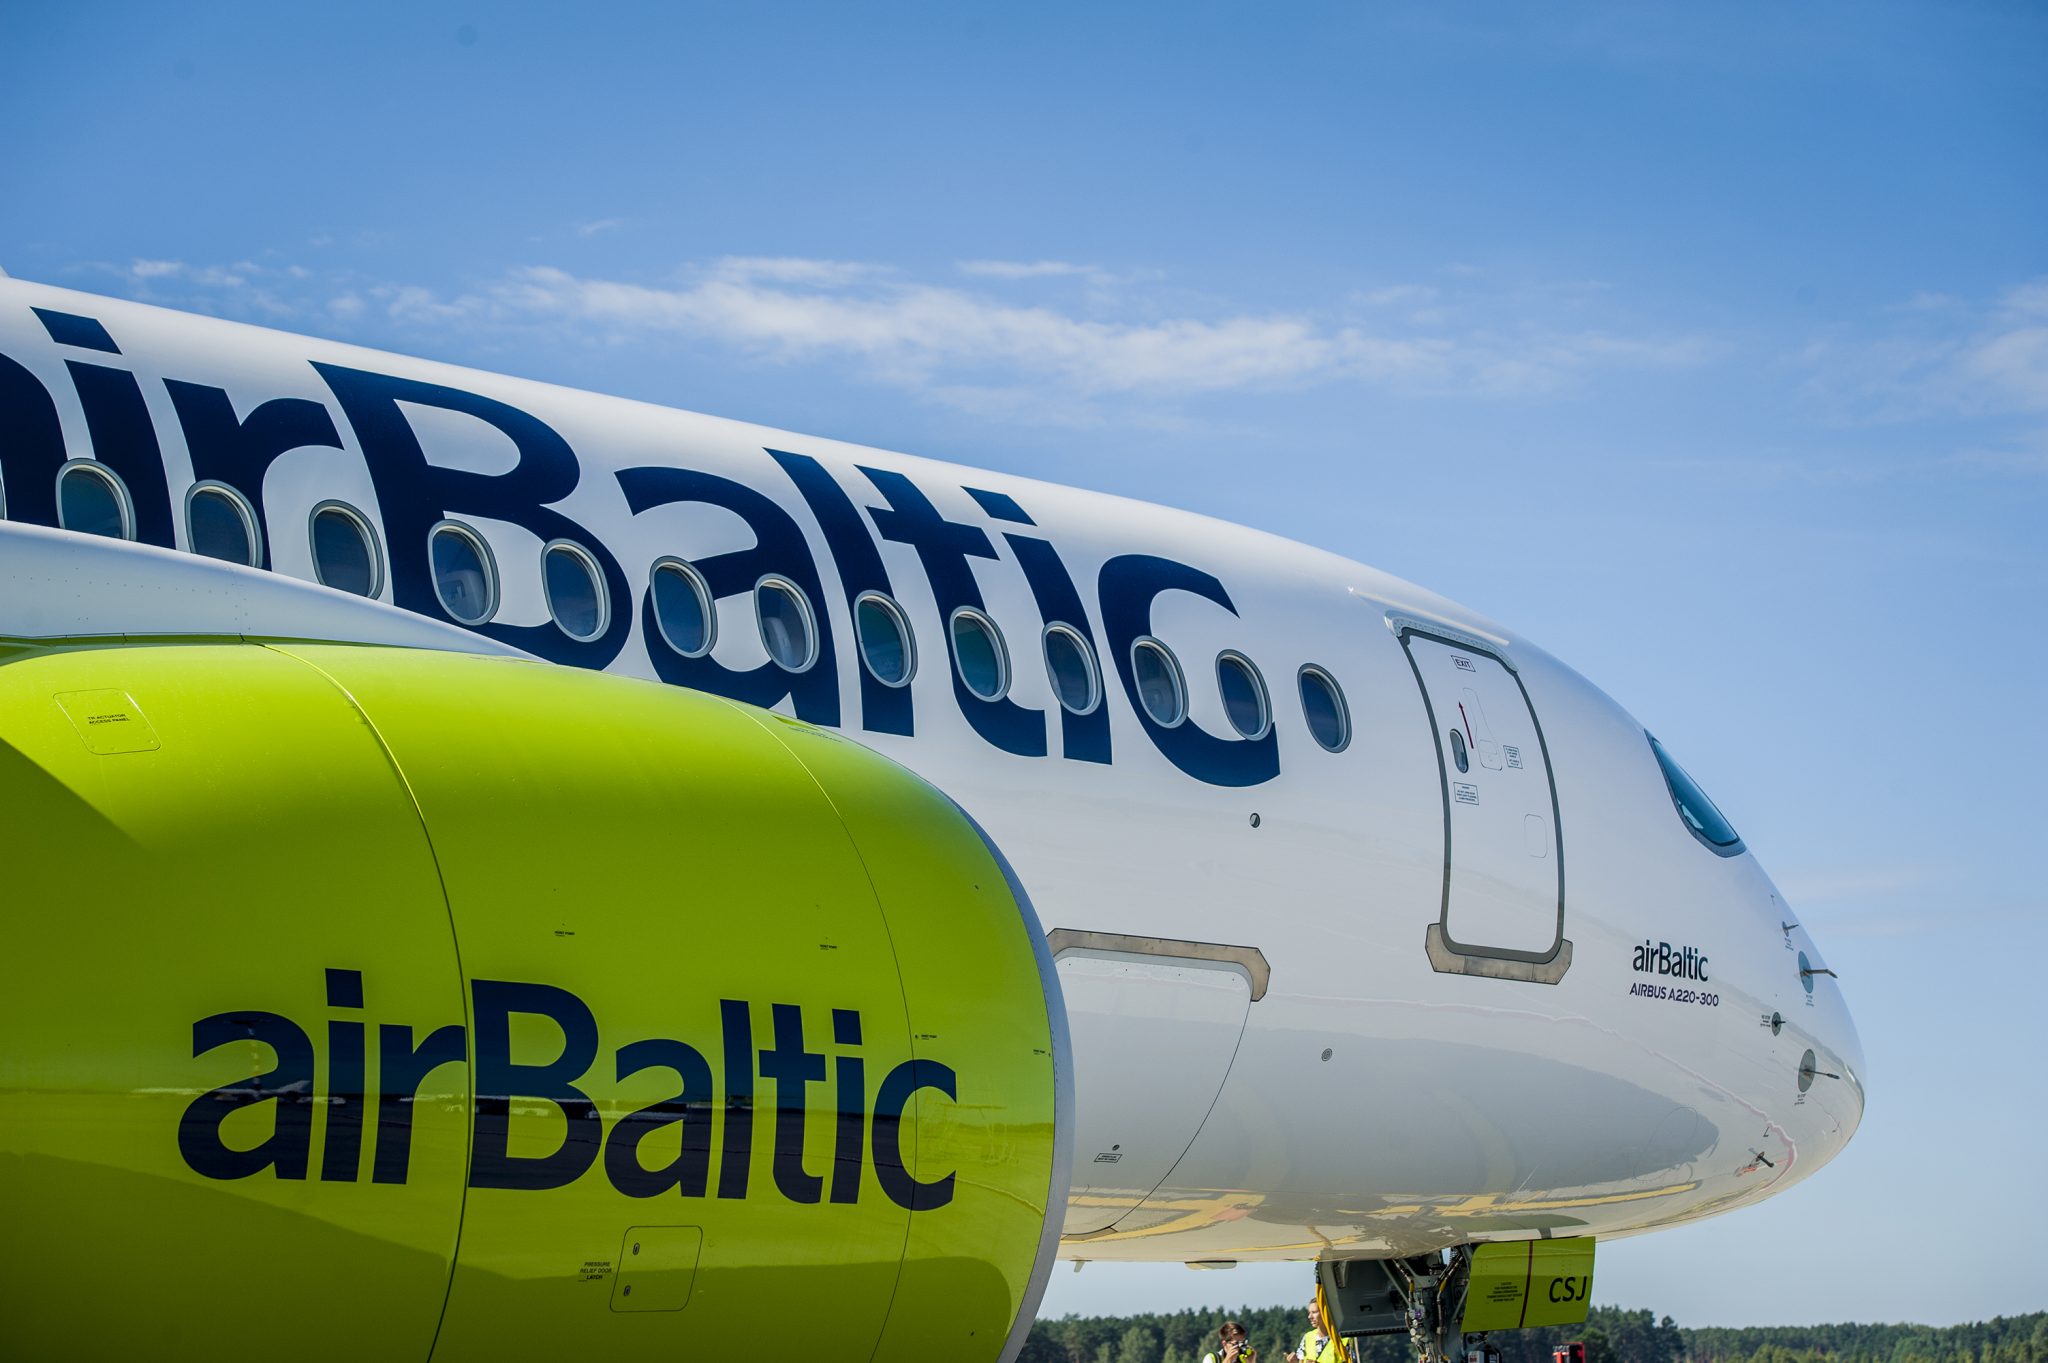 airBaltic traffic improves in May